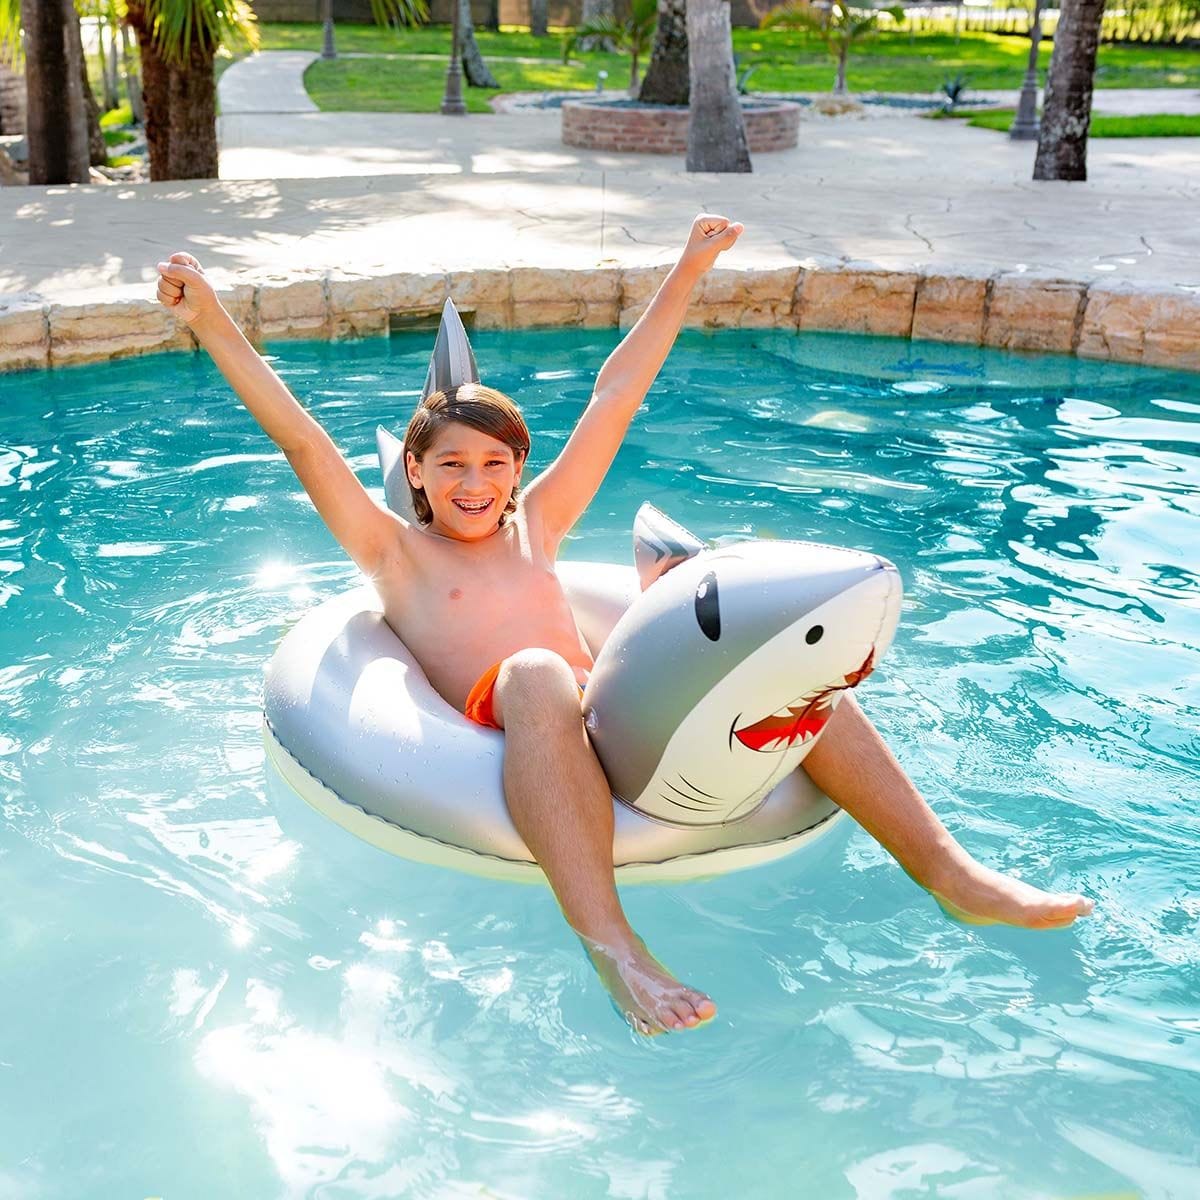 Shark Ride-On Inflatable Pool Tube 36 Inch